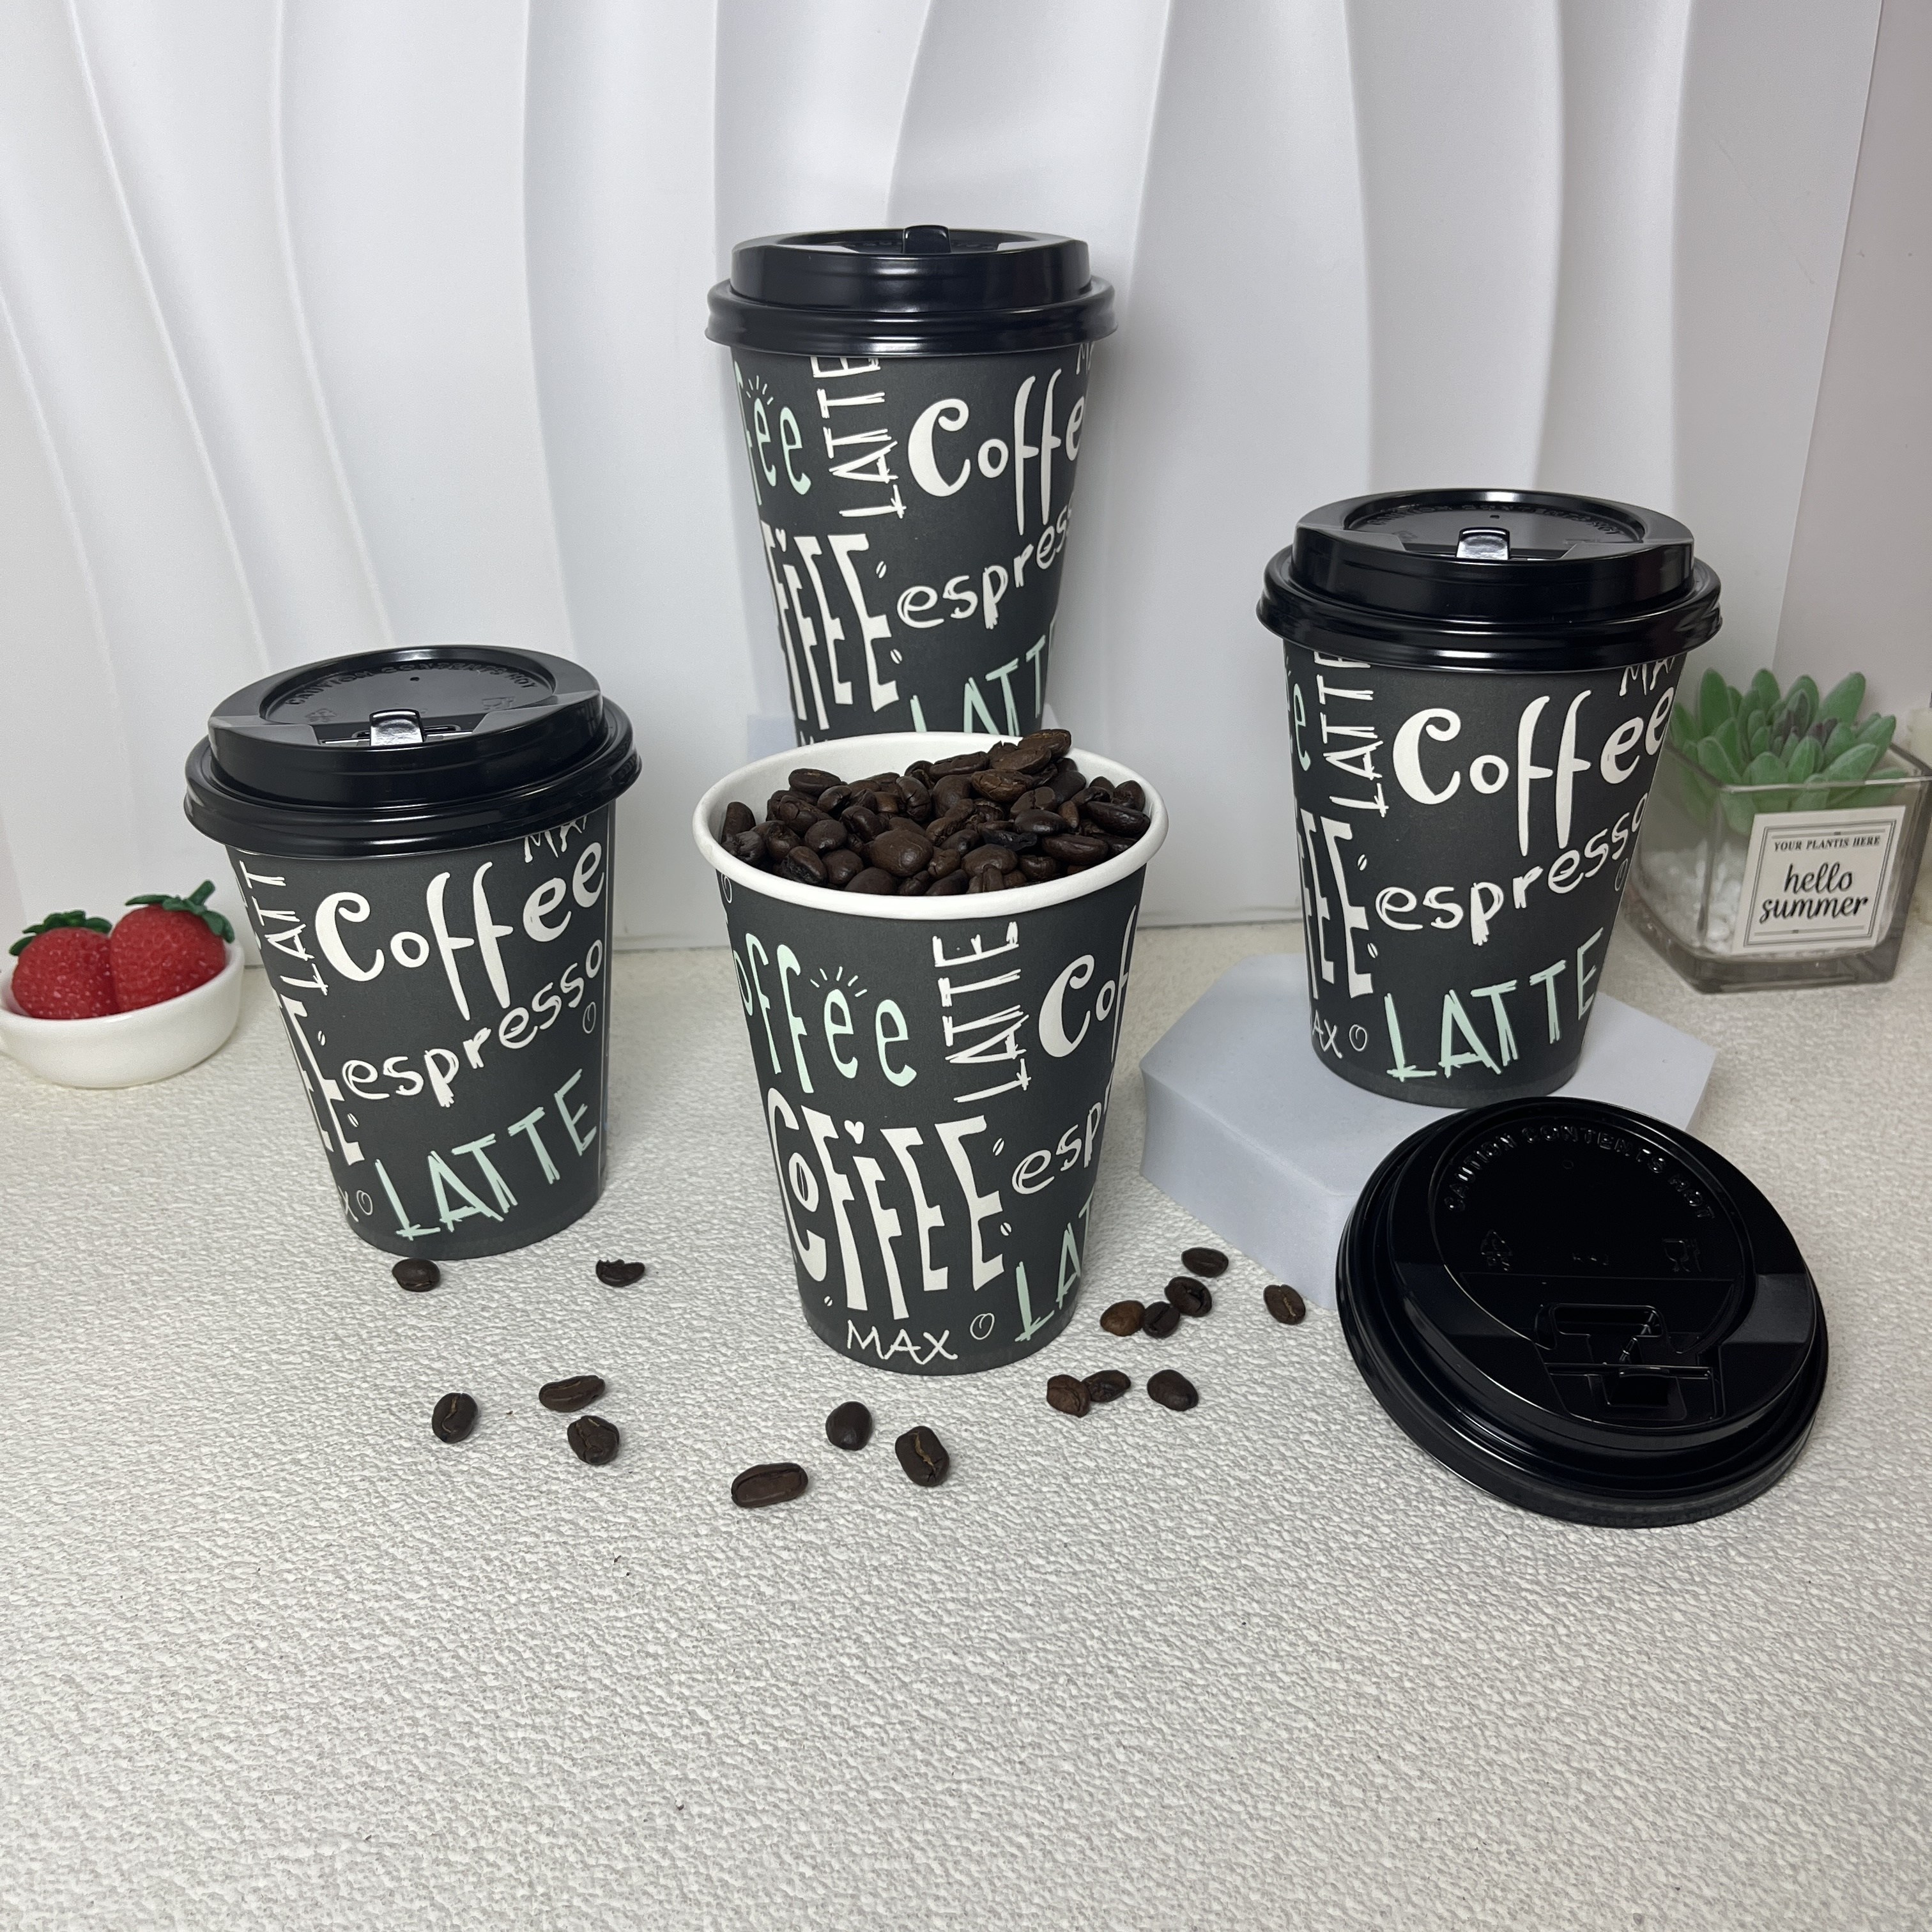 [100 Pack] 12oz Disposable White Paper Coffee Cups with Black Dome Lids and Protective Corrugated Cup Sleeves - Perfect Disposable Travel Mug for Home